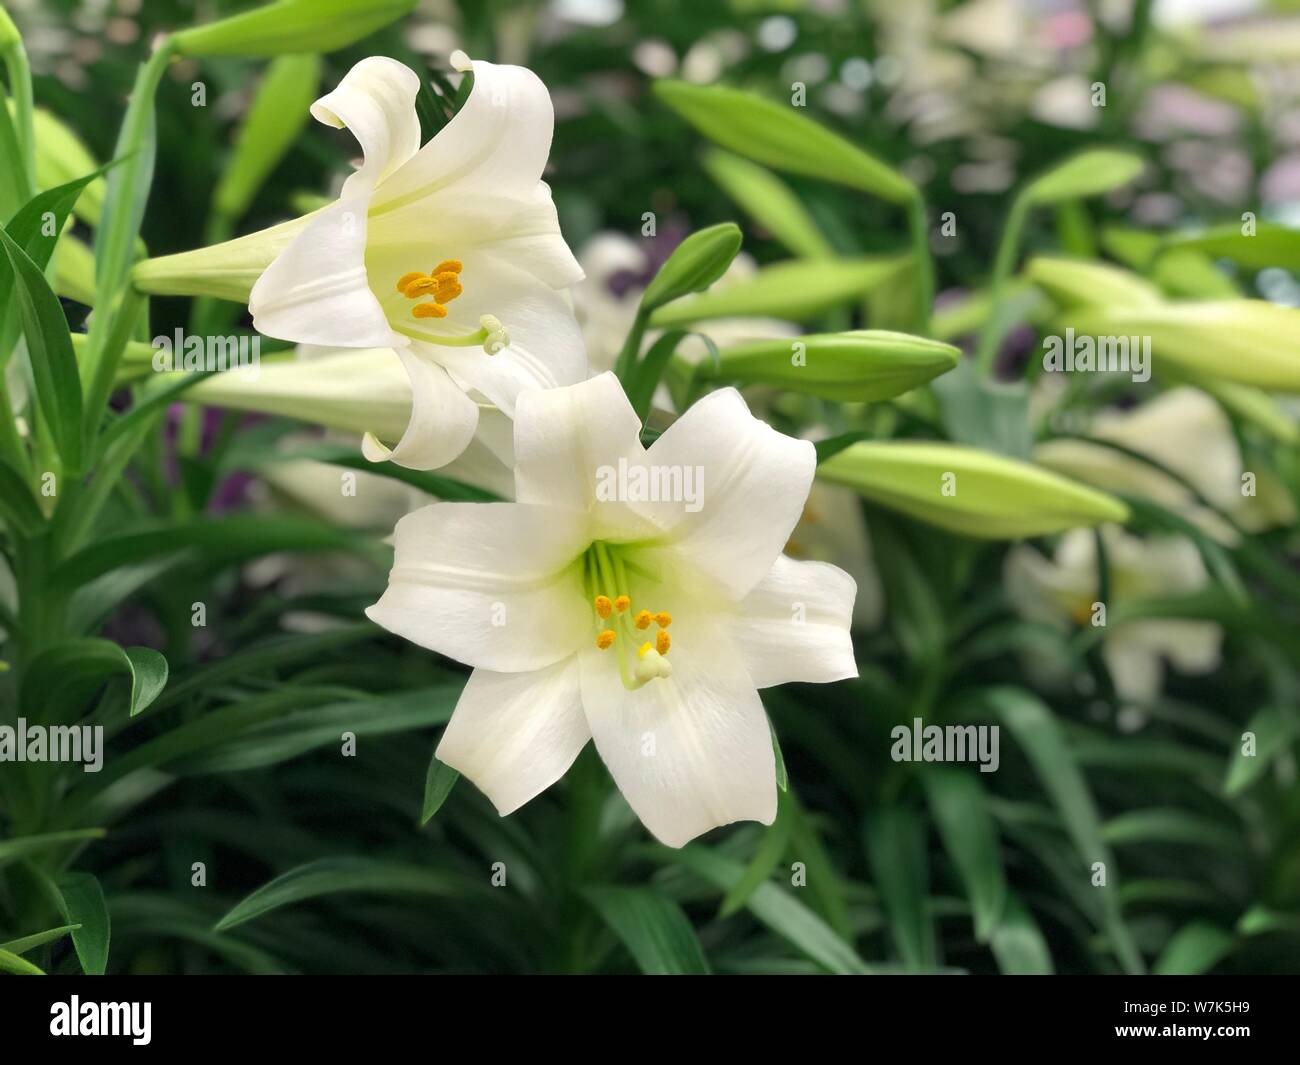 Lily flower image green and white beautiful plant Stock Photo